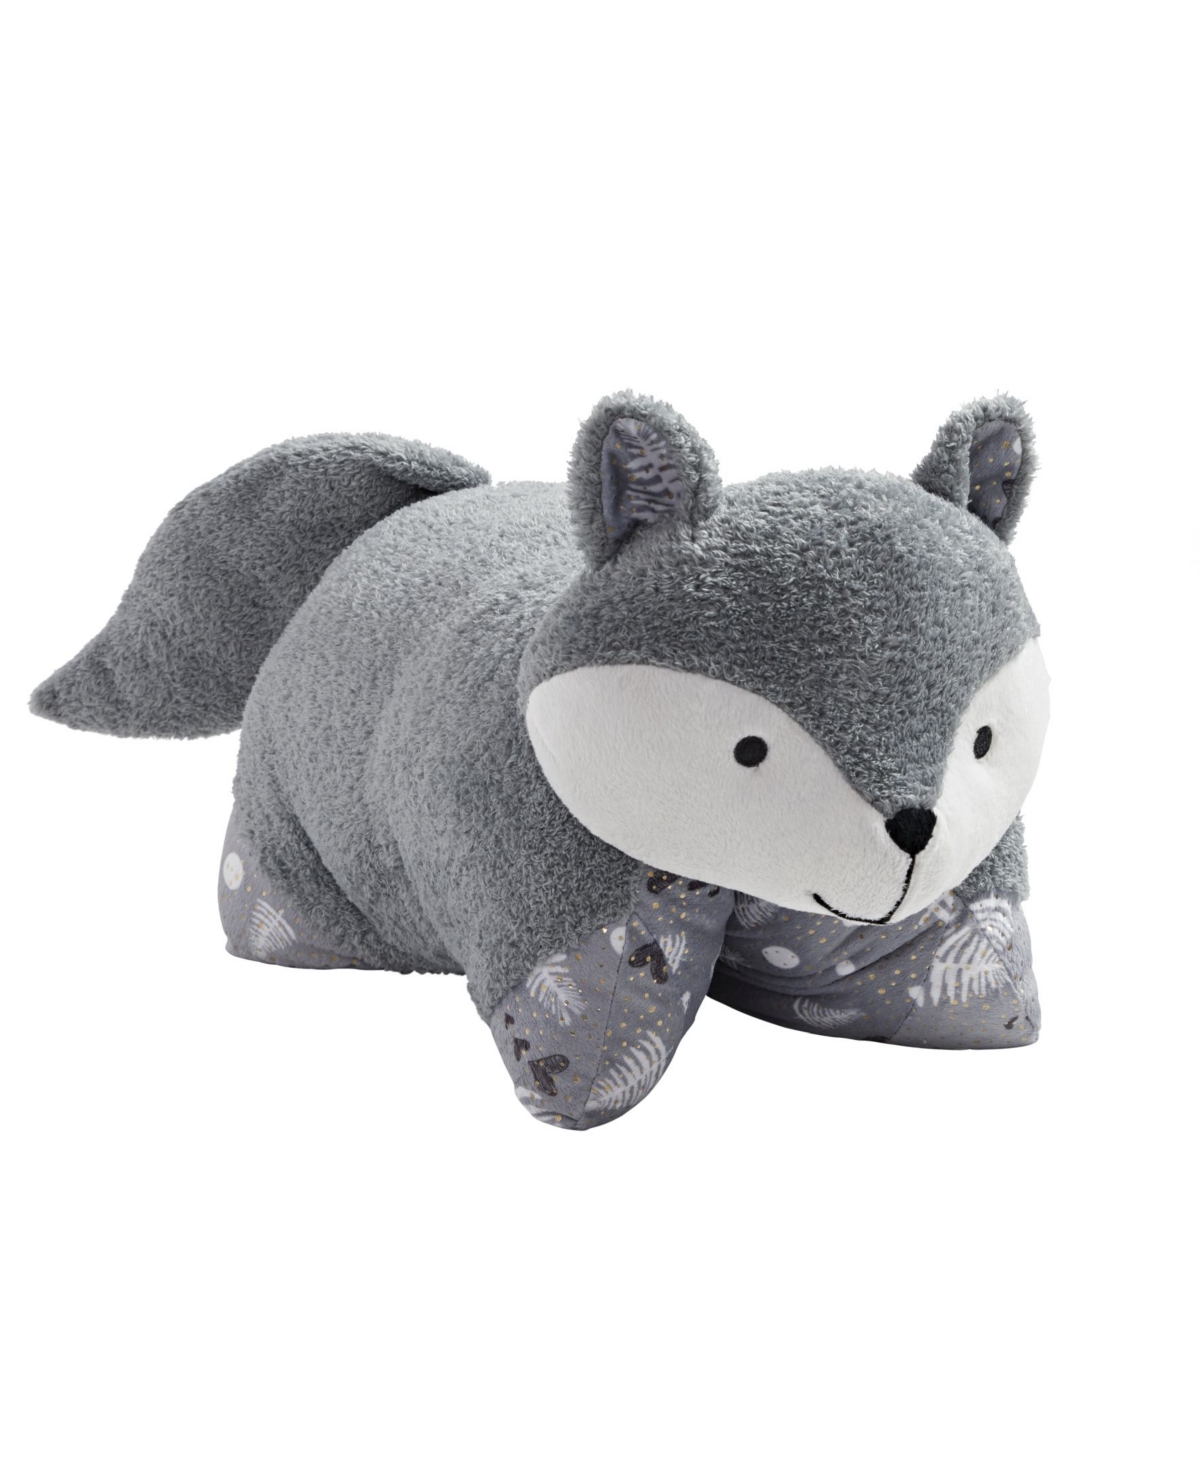 Pillow Pets Naturally Comfy Fox Plush Stuffed Animal Plush Toy In Gray